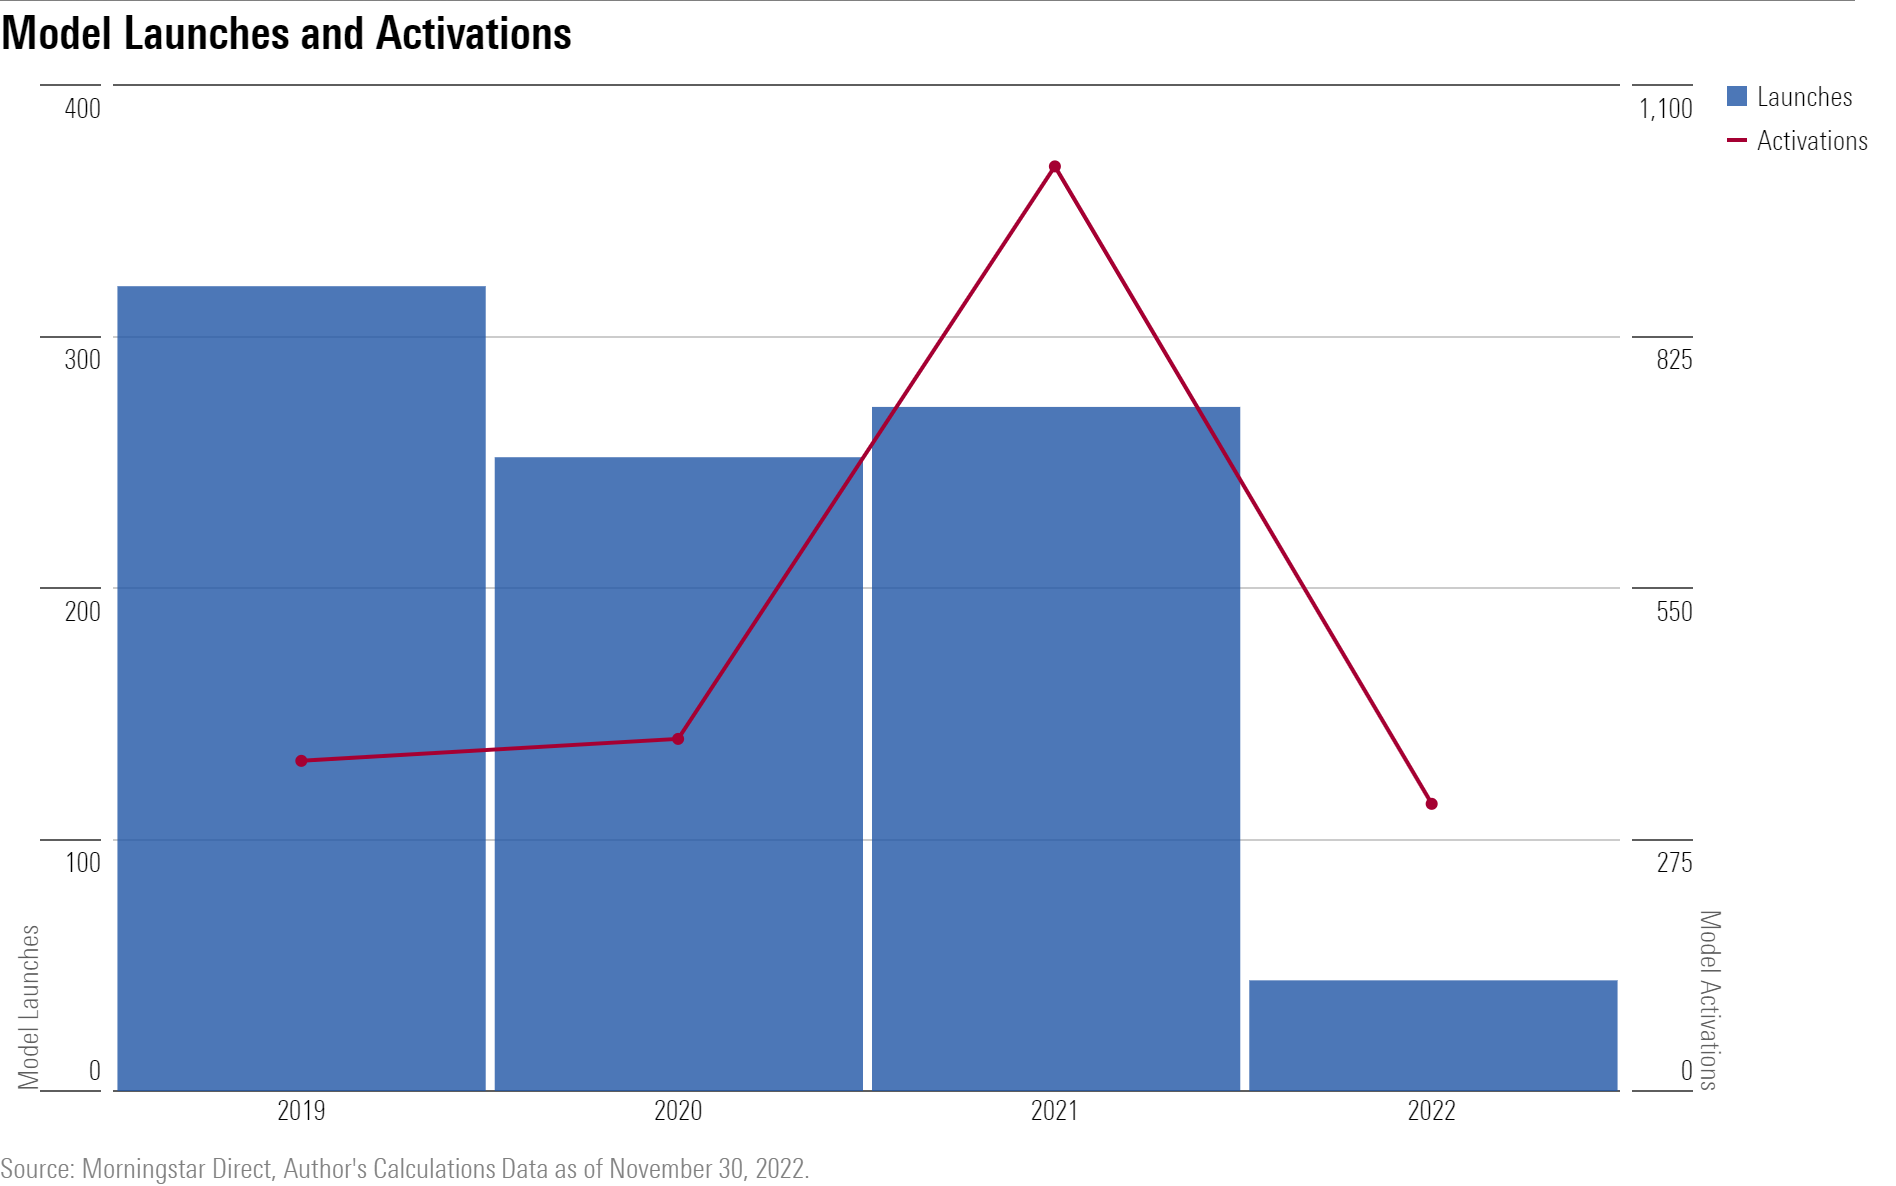 A bar chart showing model launches since 2019 and a line chart showing model activations since 2019.